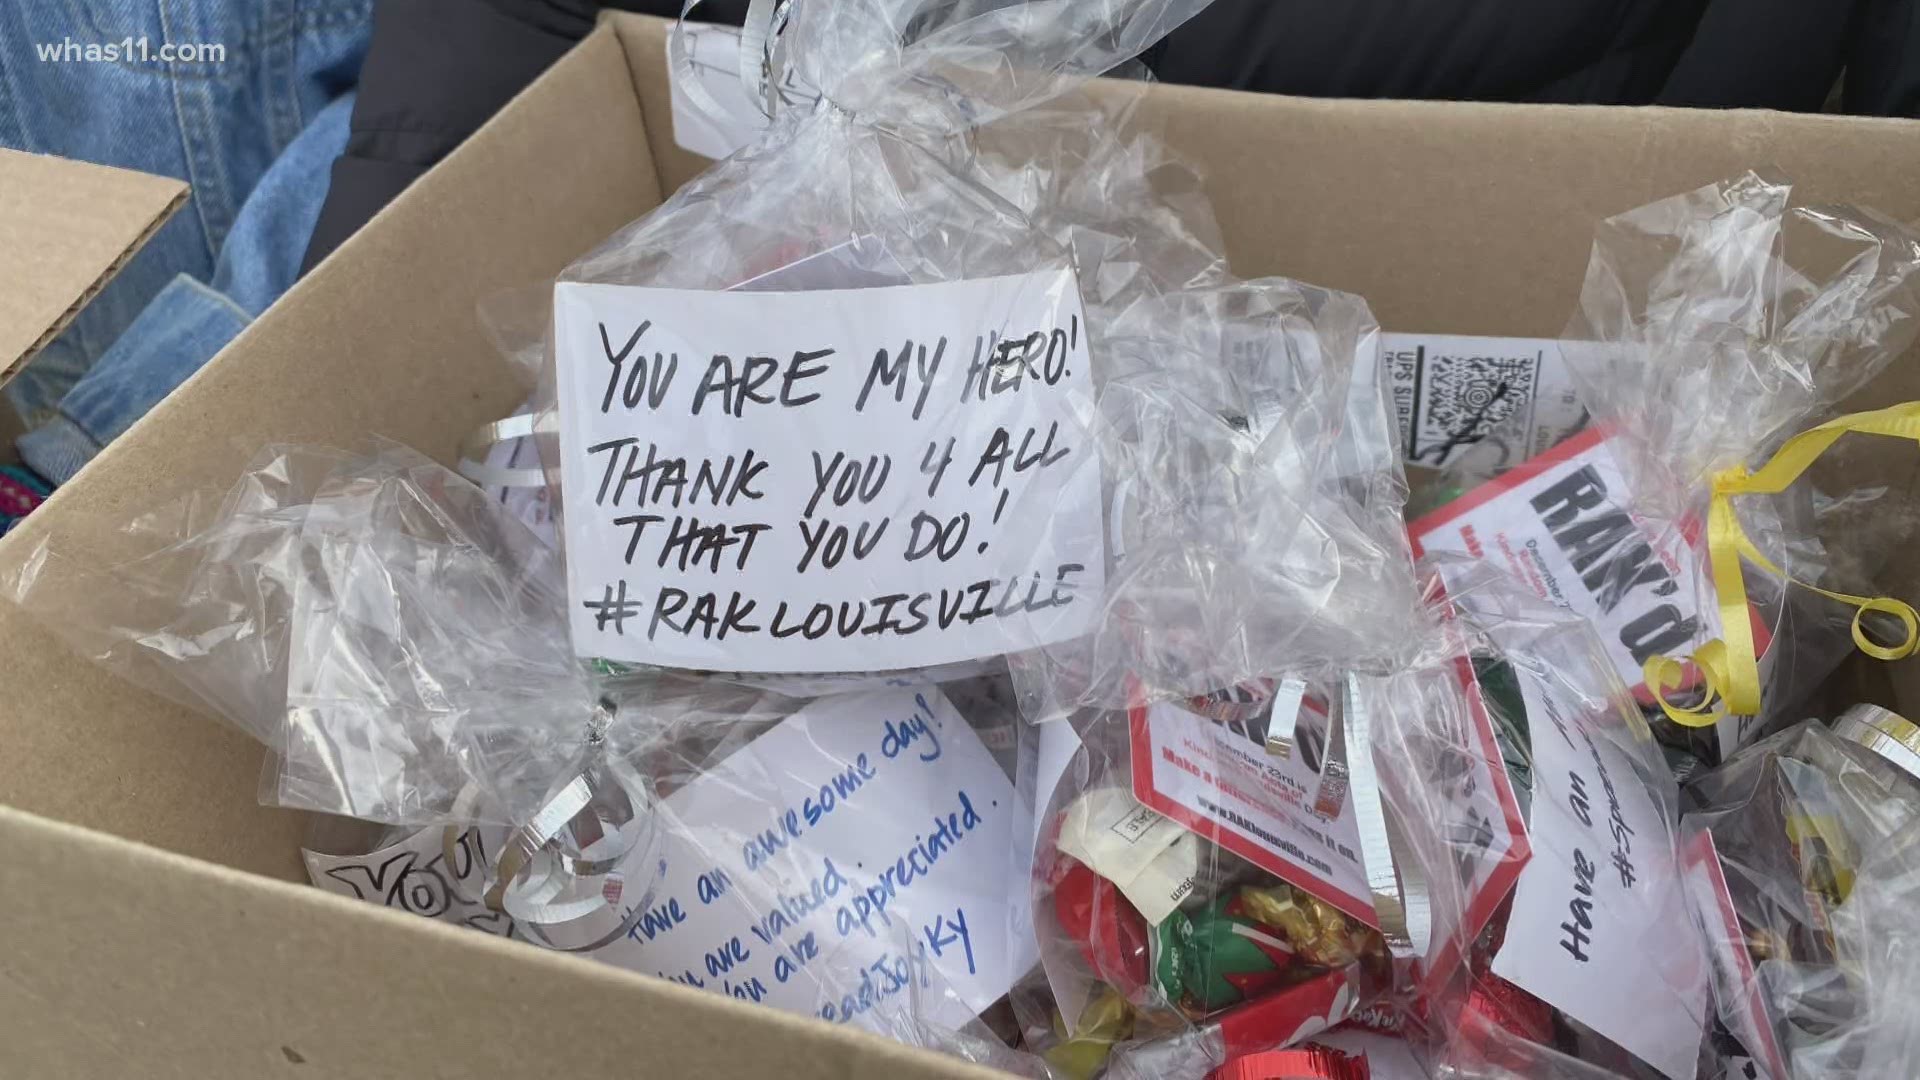 Students from Random Acts of Kindness Louisville flooded staff parking areas of several hospitals with goodies and positive messages as part of 23 day challenge.